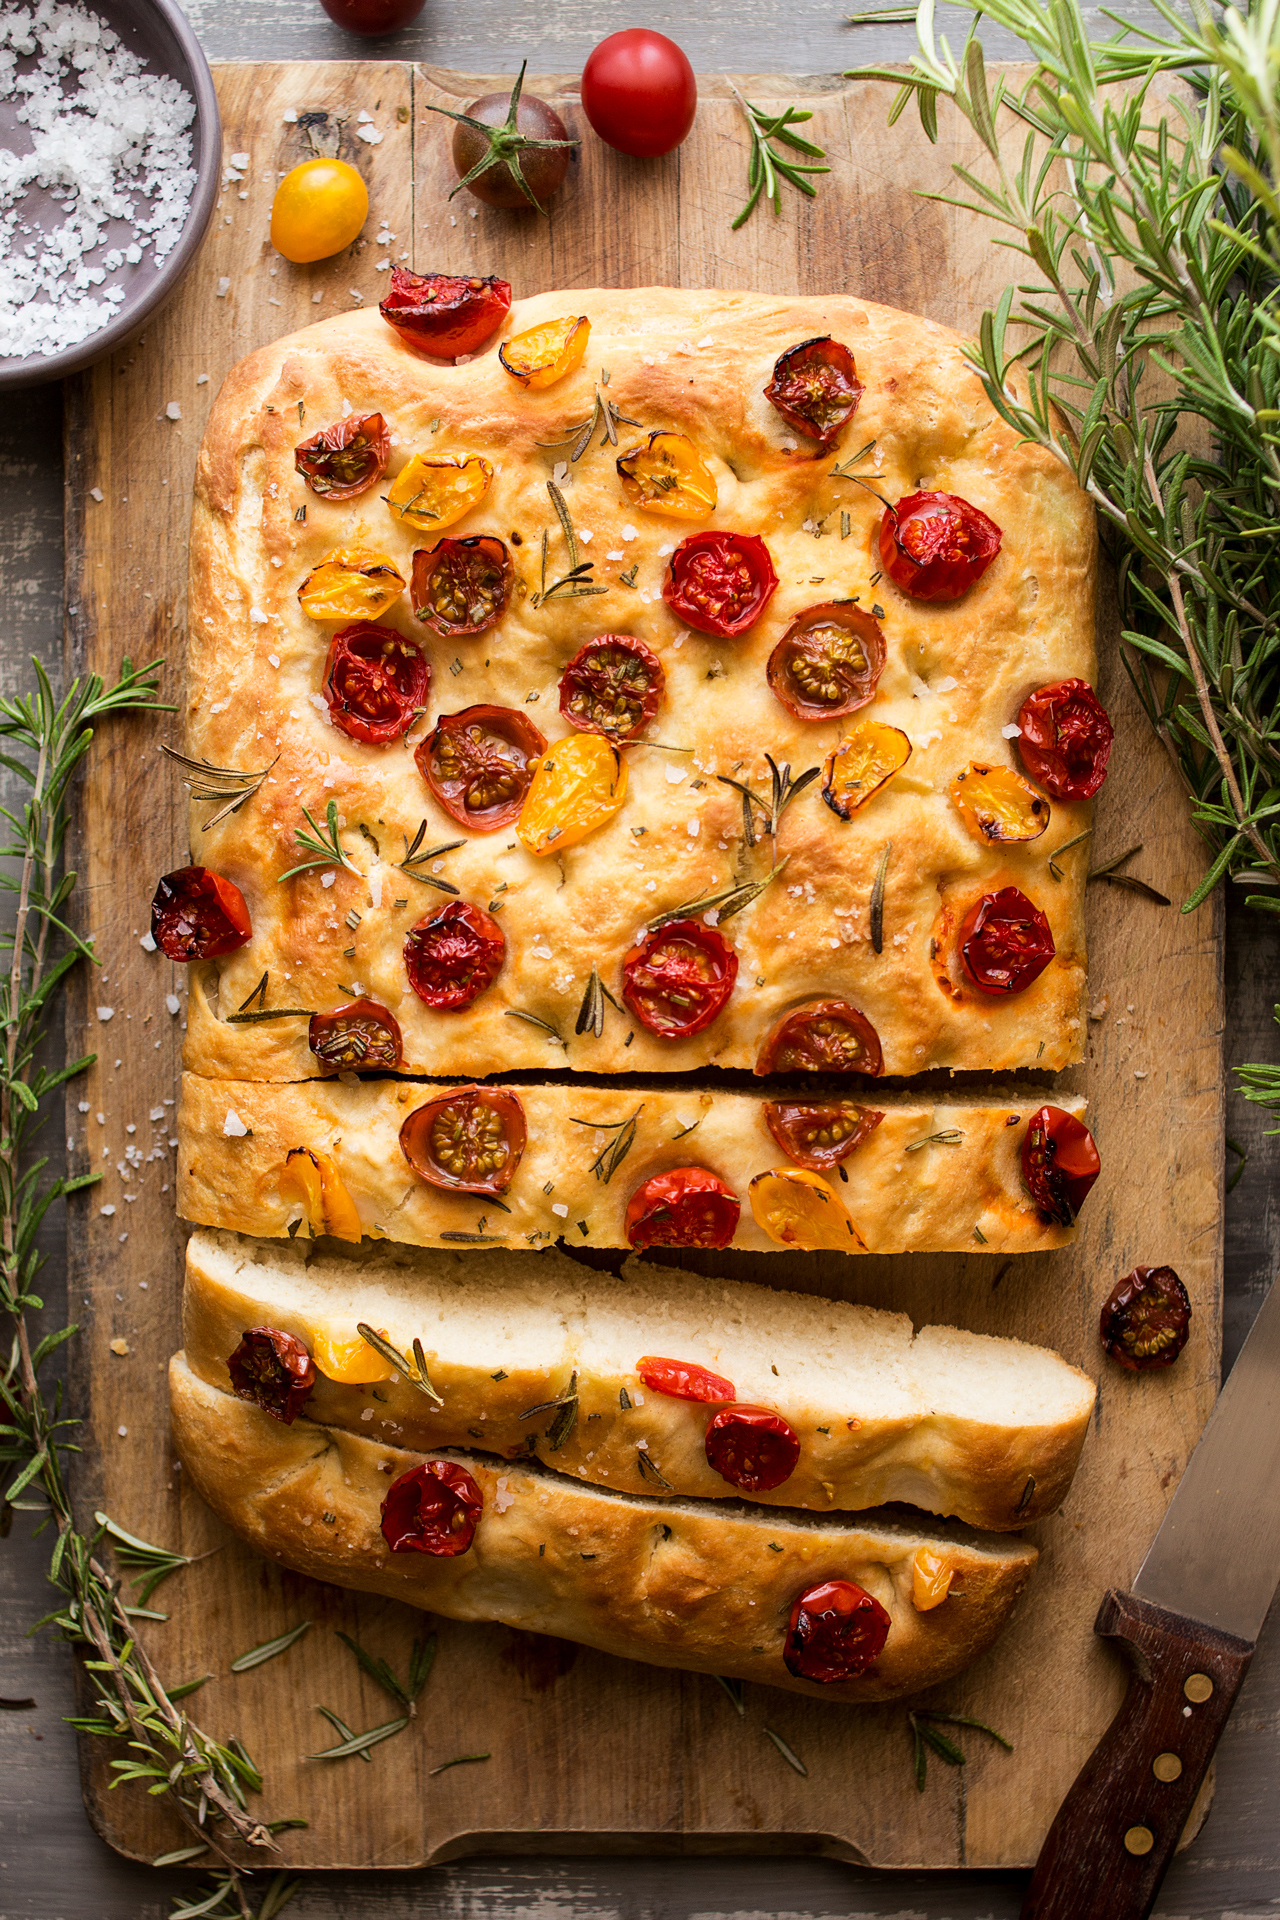 Garden Bread Over Top chefs from around the world will guide you
through kitchen